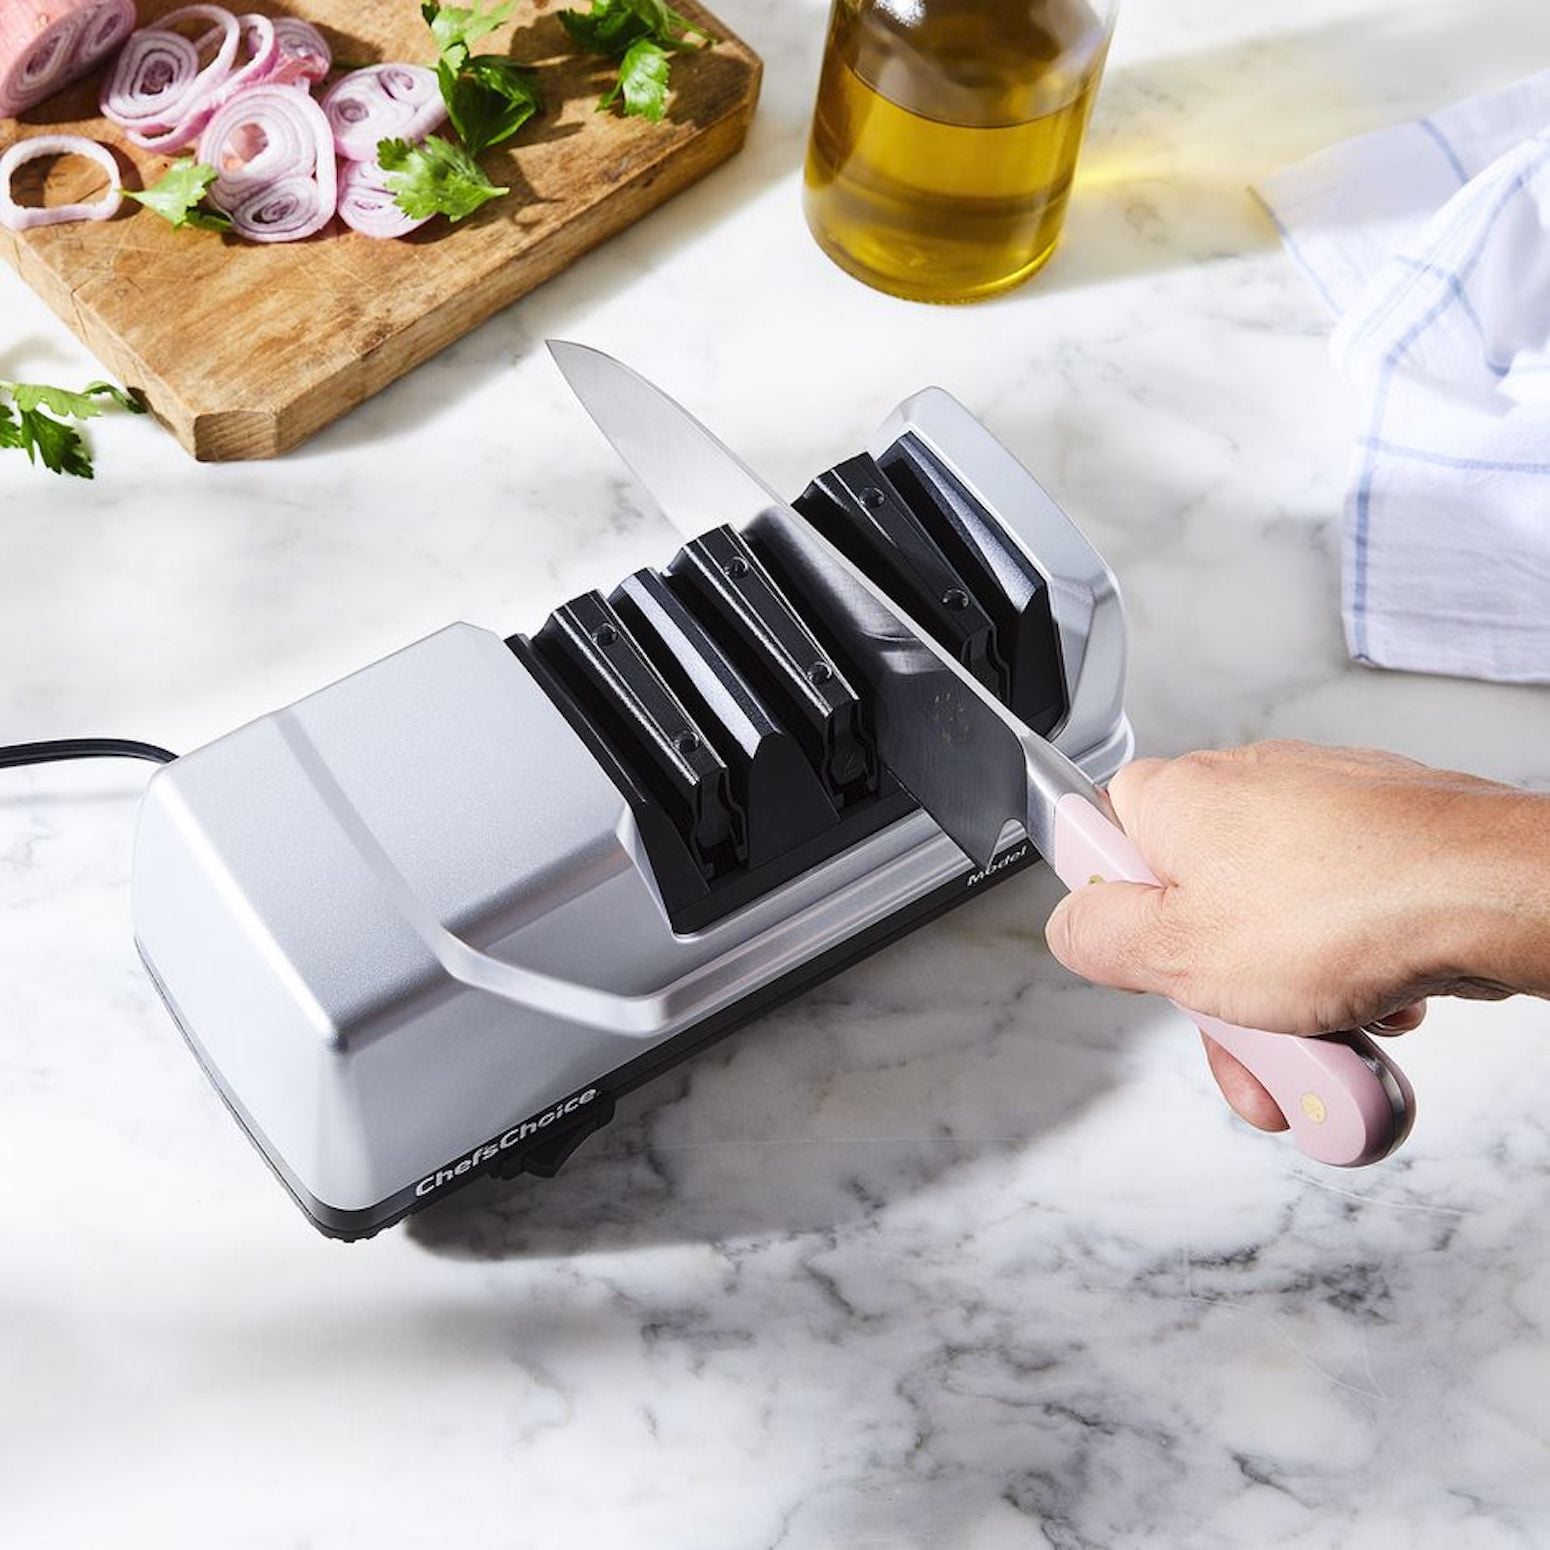 The Biggest Kitchen Trends, Gadgets and Smart Tech You'll See in